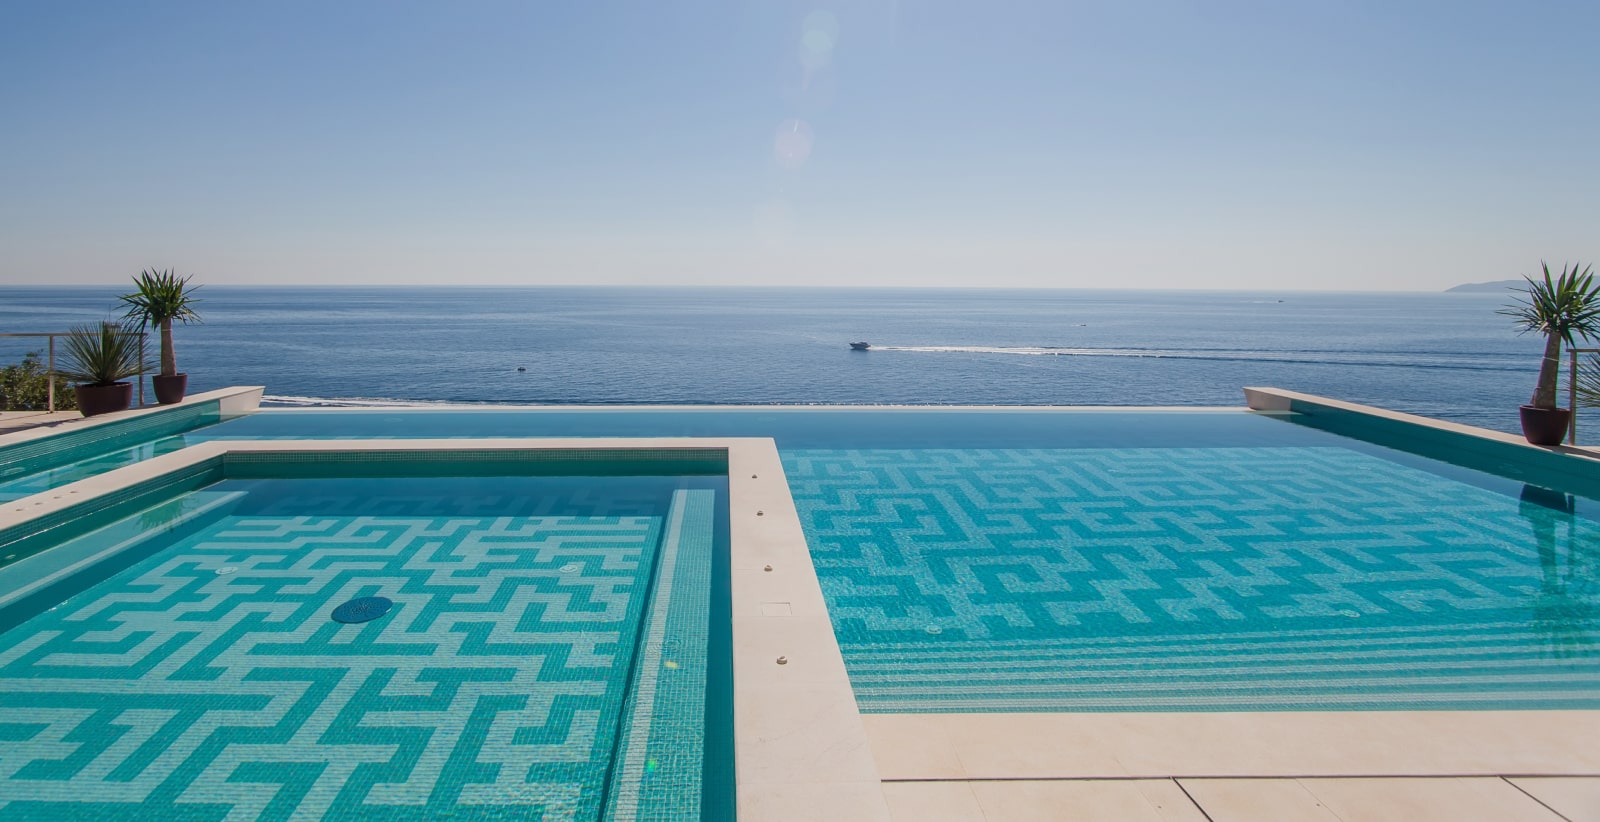 Dubai Pools About Page Banner Image